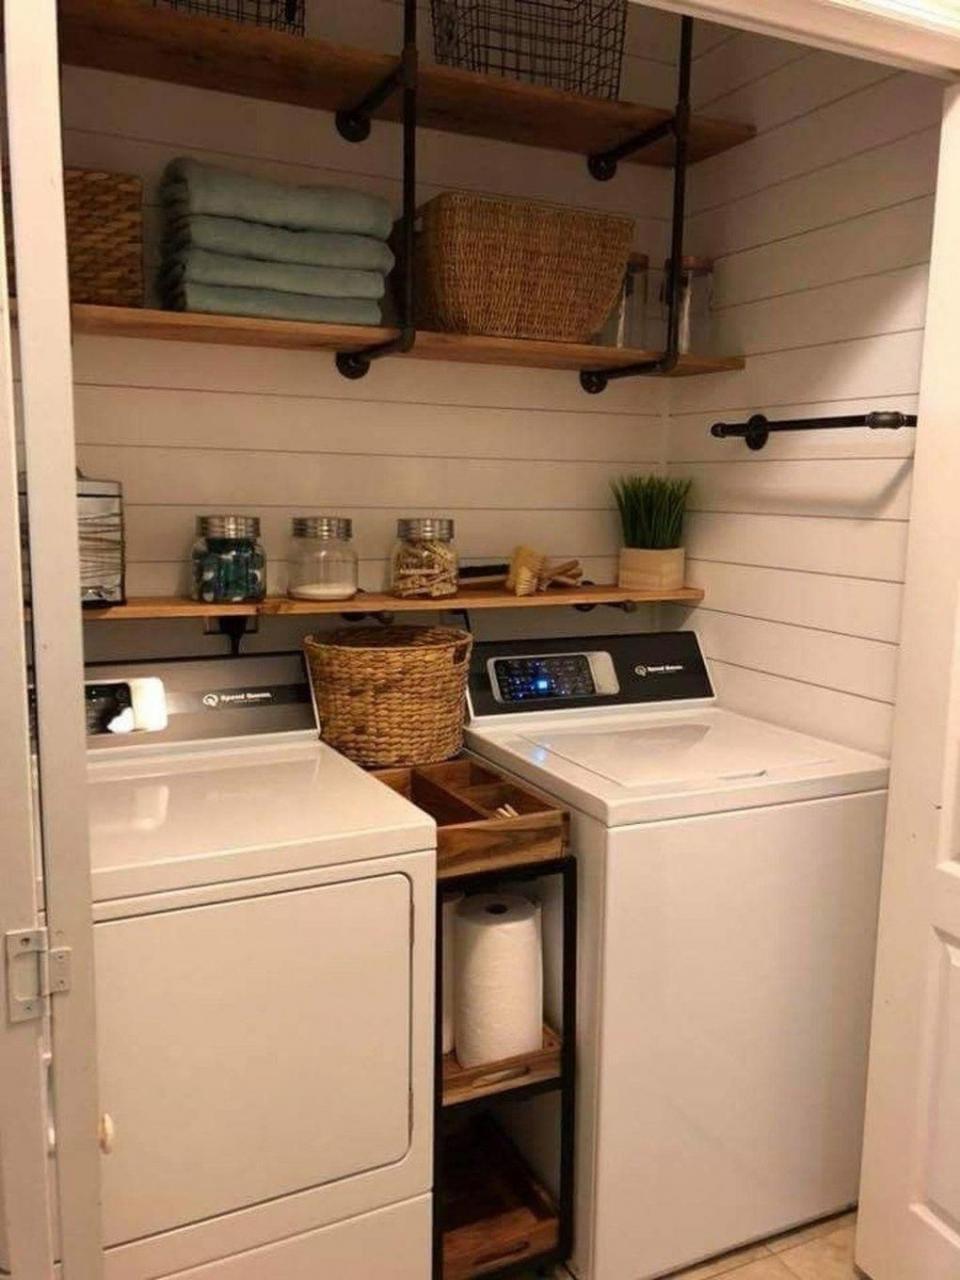 shiplap idea for behind washer and dryer with more industrial shelving